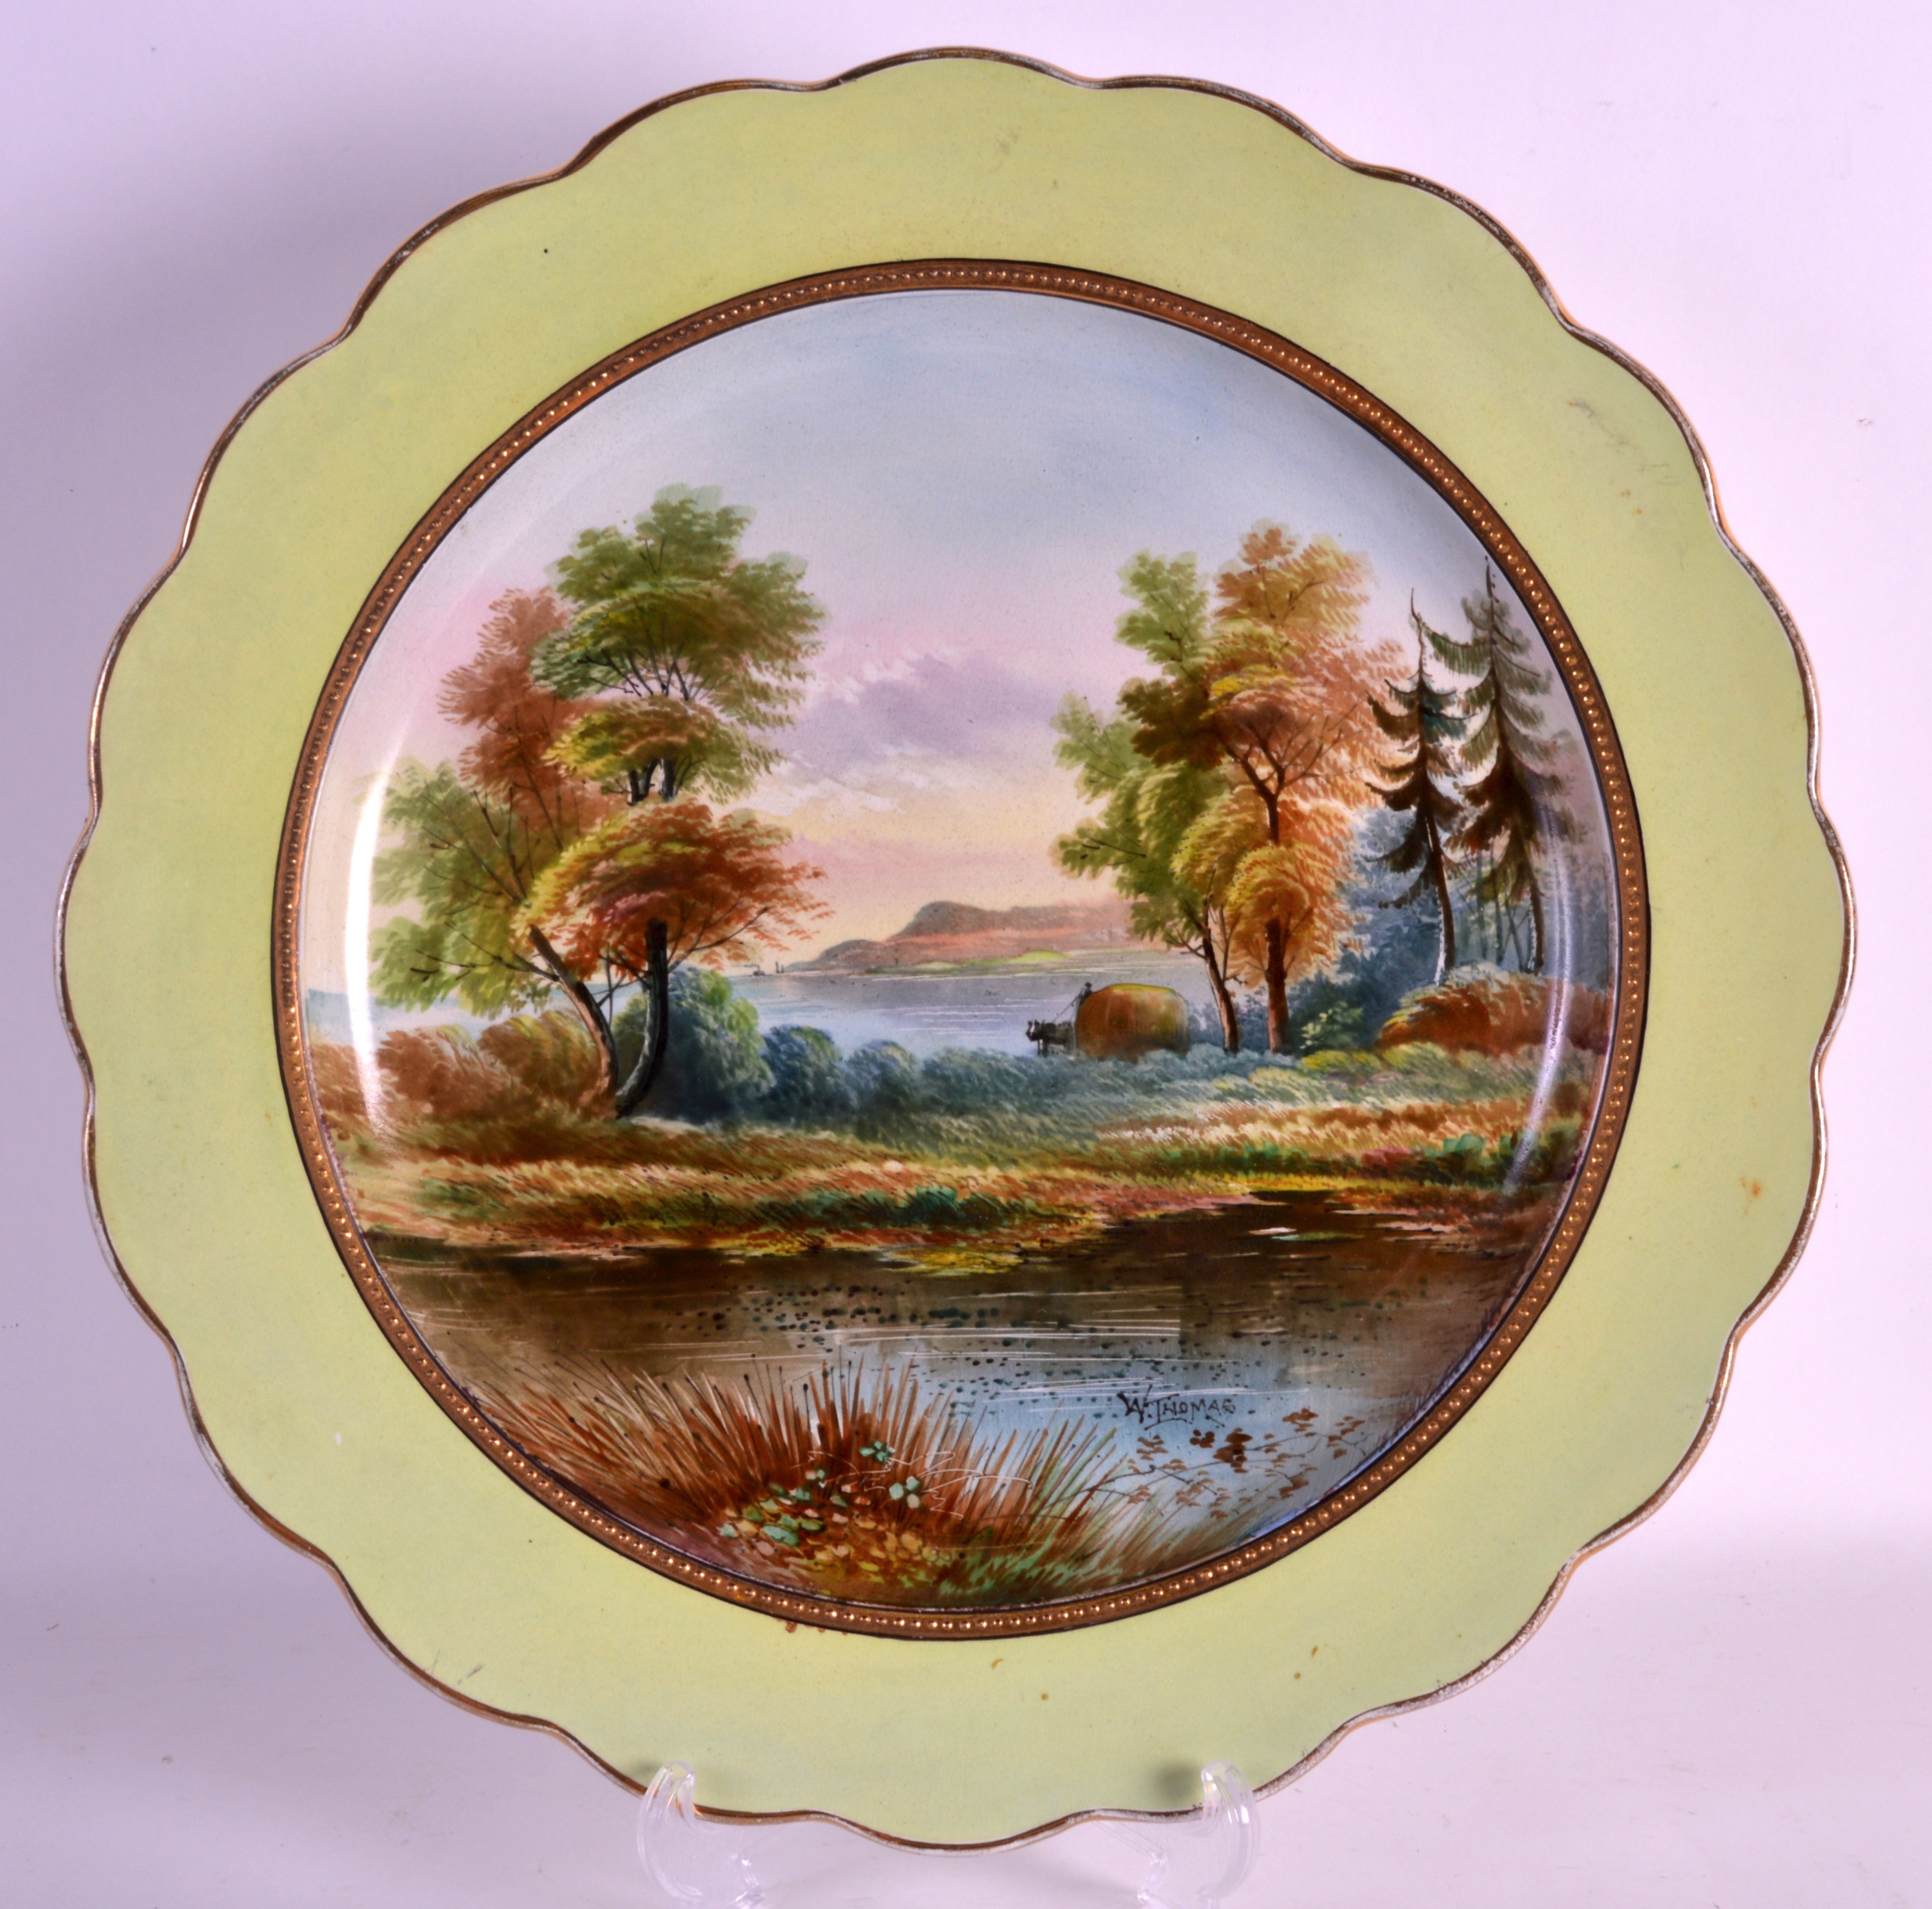 A MID 19TH CENTURY ENGLISH POTTERY CHARGER painted with a coastal landscape by Thomas. 1Ft 3ins